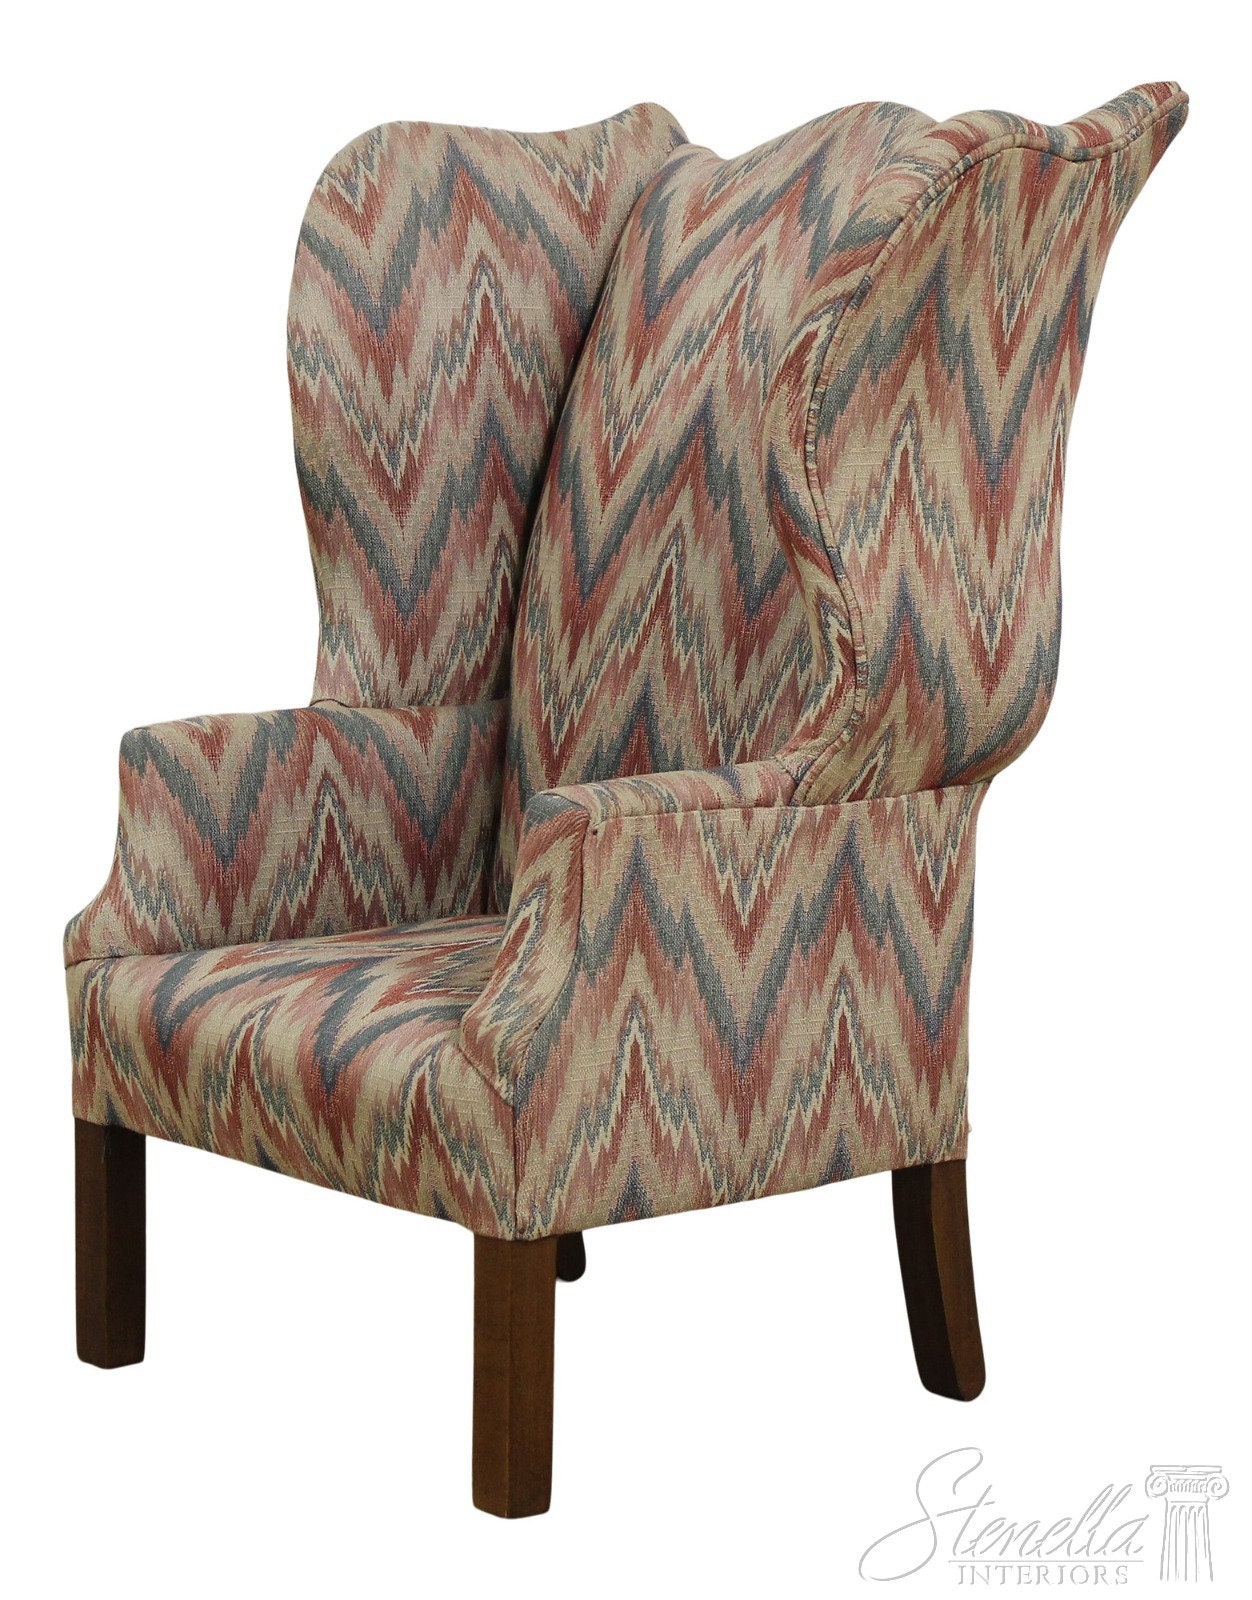 Ethan Allen 'Parker' Chairs in a berry color flame stitch fabric